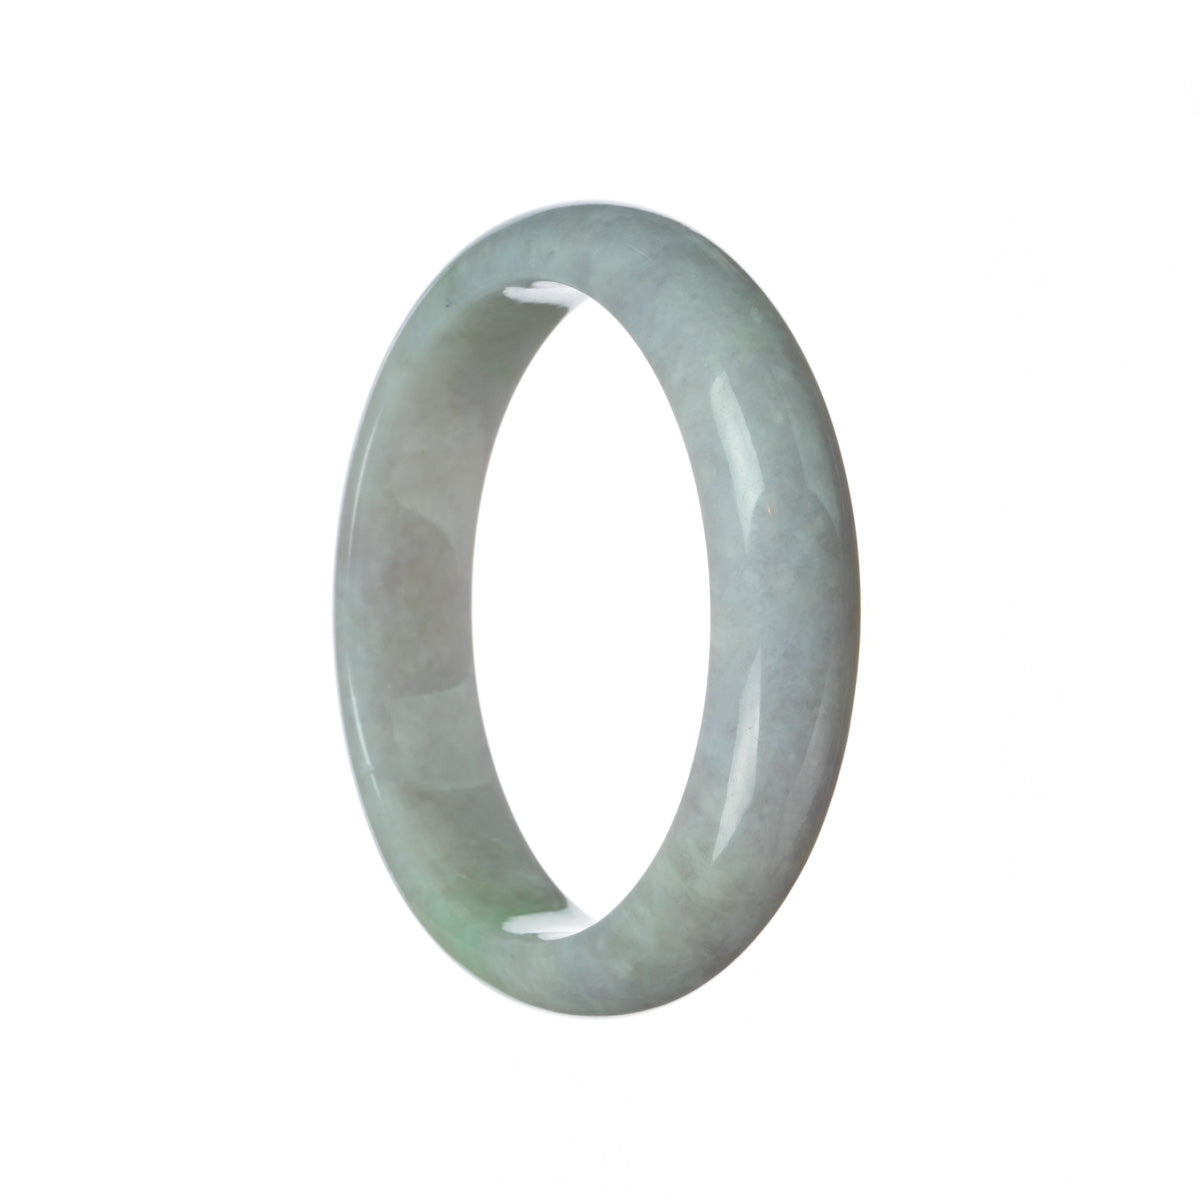 An elegant lavender traditional jade bangle bracelet with a beautiful half moon shape, crafted from authentic Grade A jade.